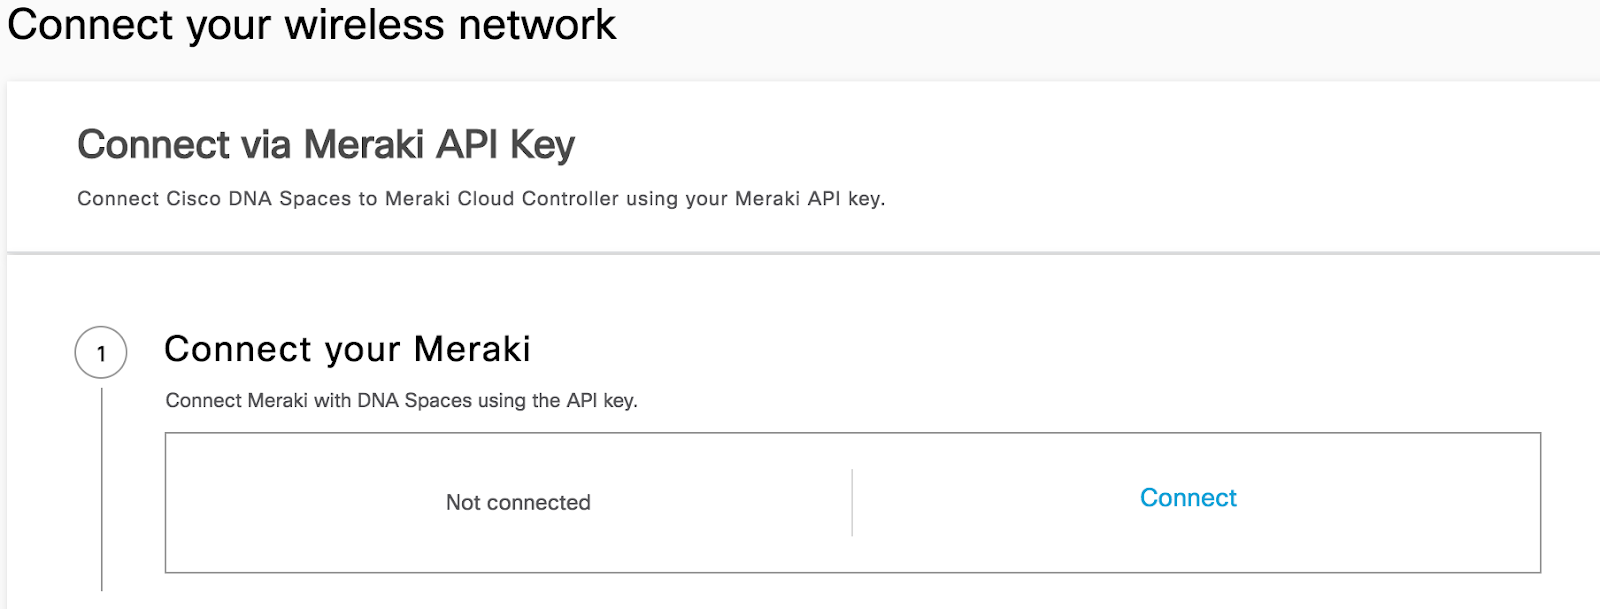 On the Connect your wireless network,  click “Connect” under Connect your Meraki.